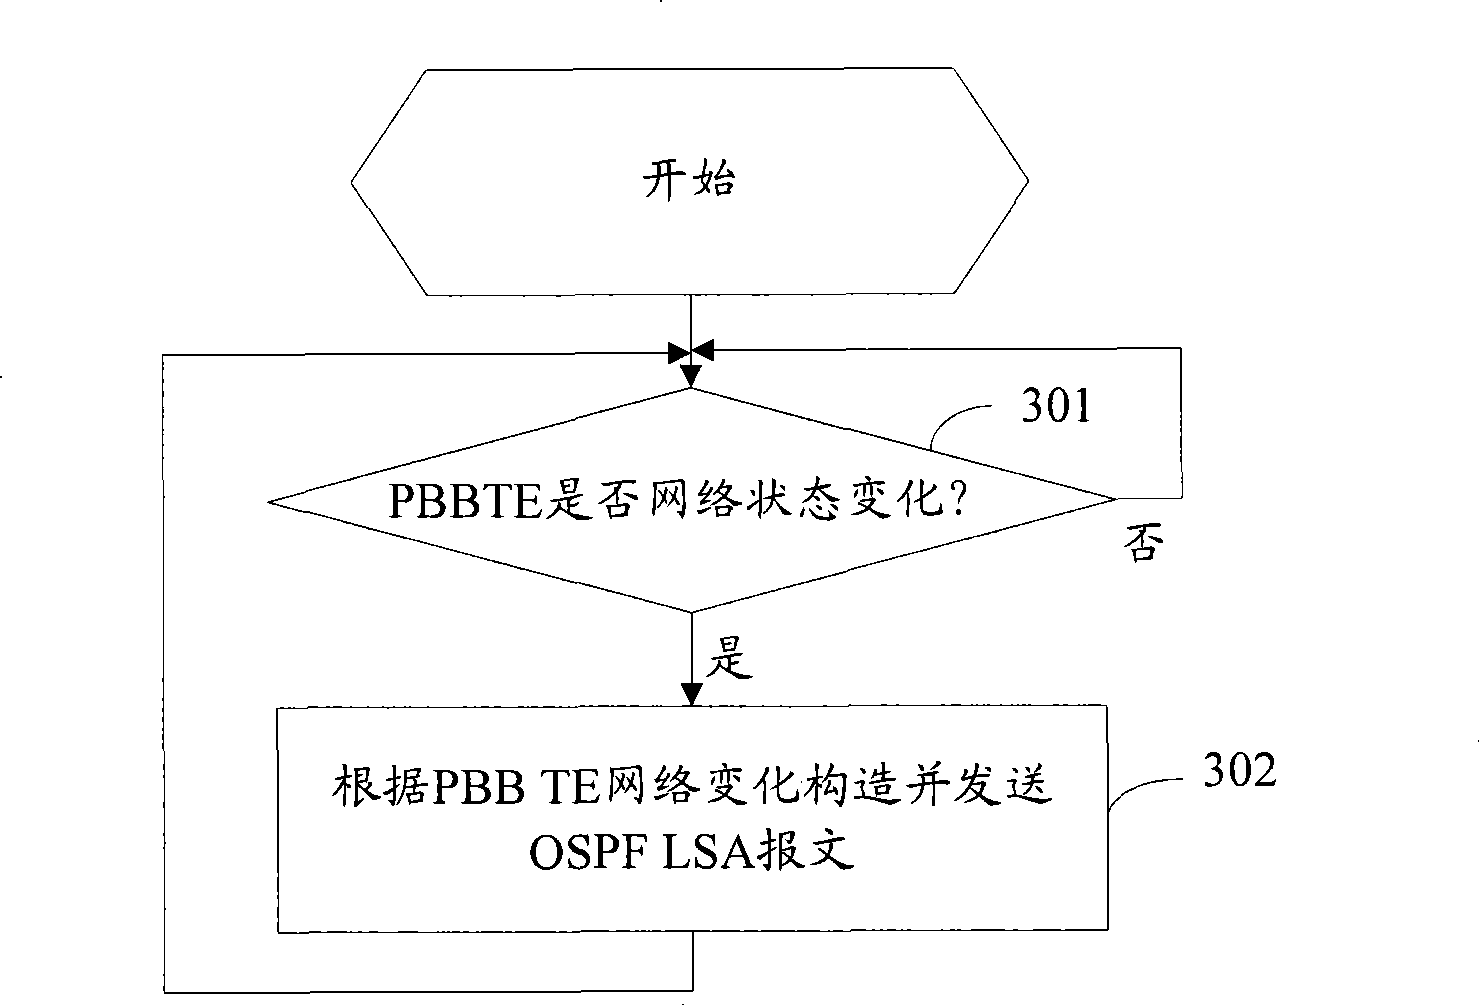 Method and apparatus for automatic topology discovery and resource management in PBB network